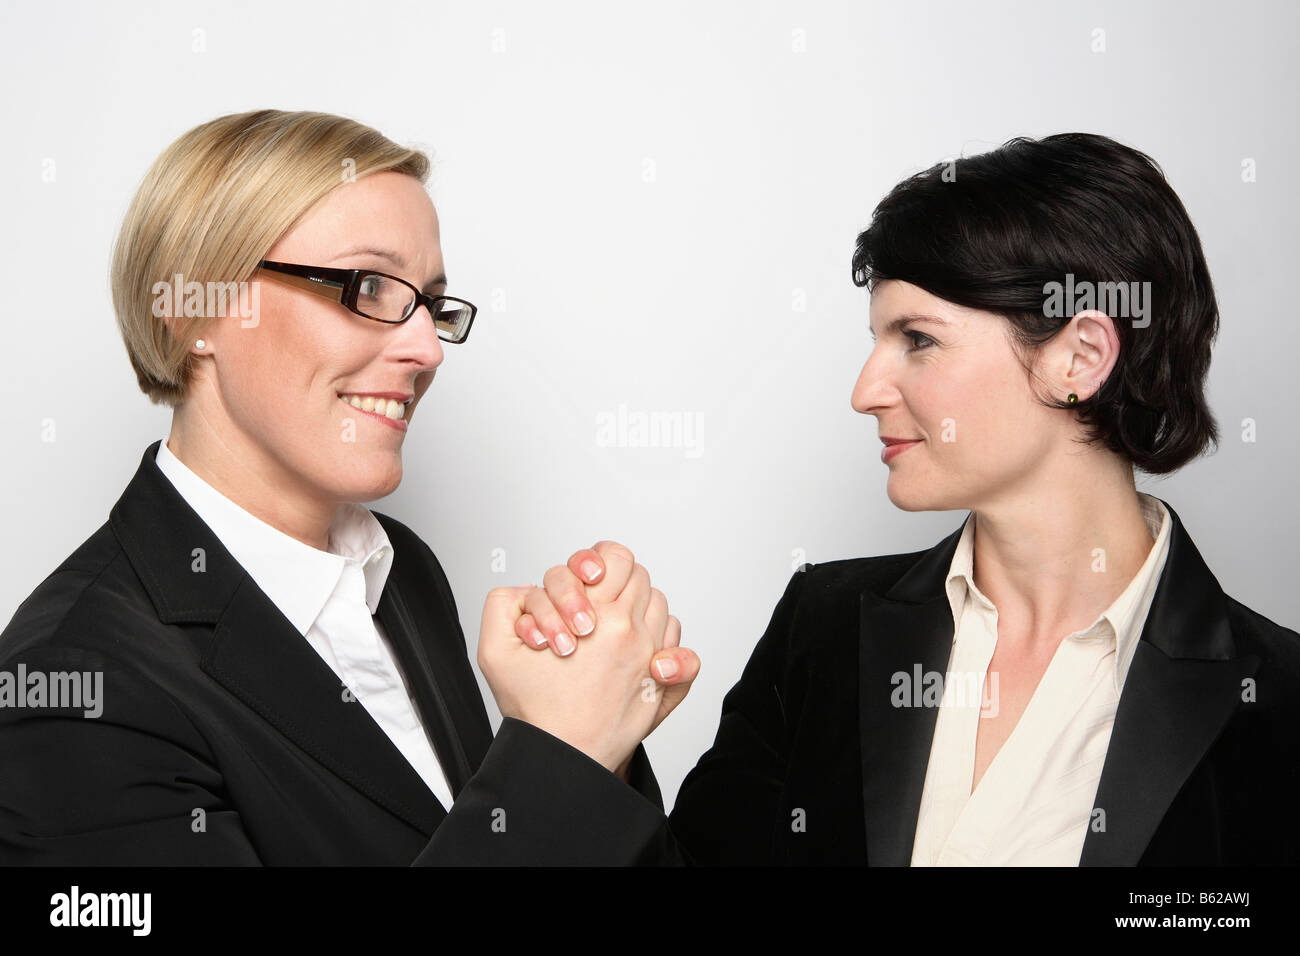 Two confident looking women shaking hands Stock Photo